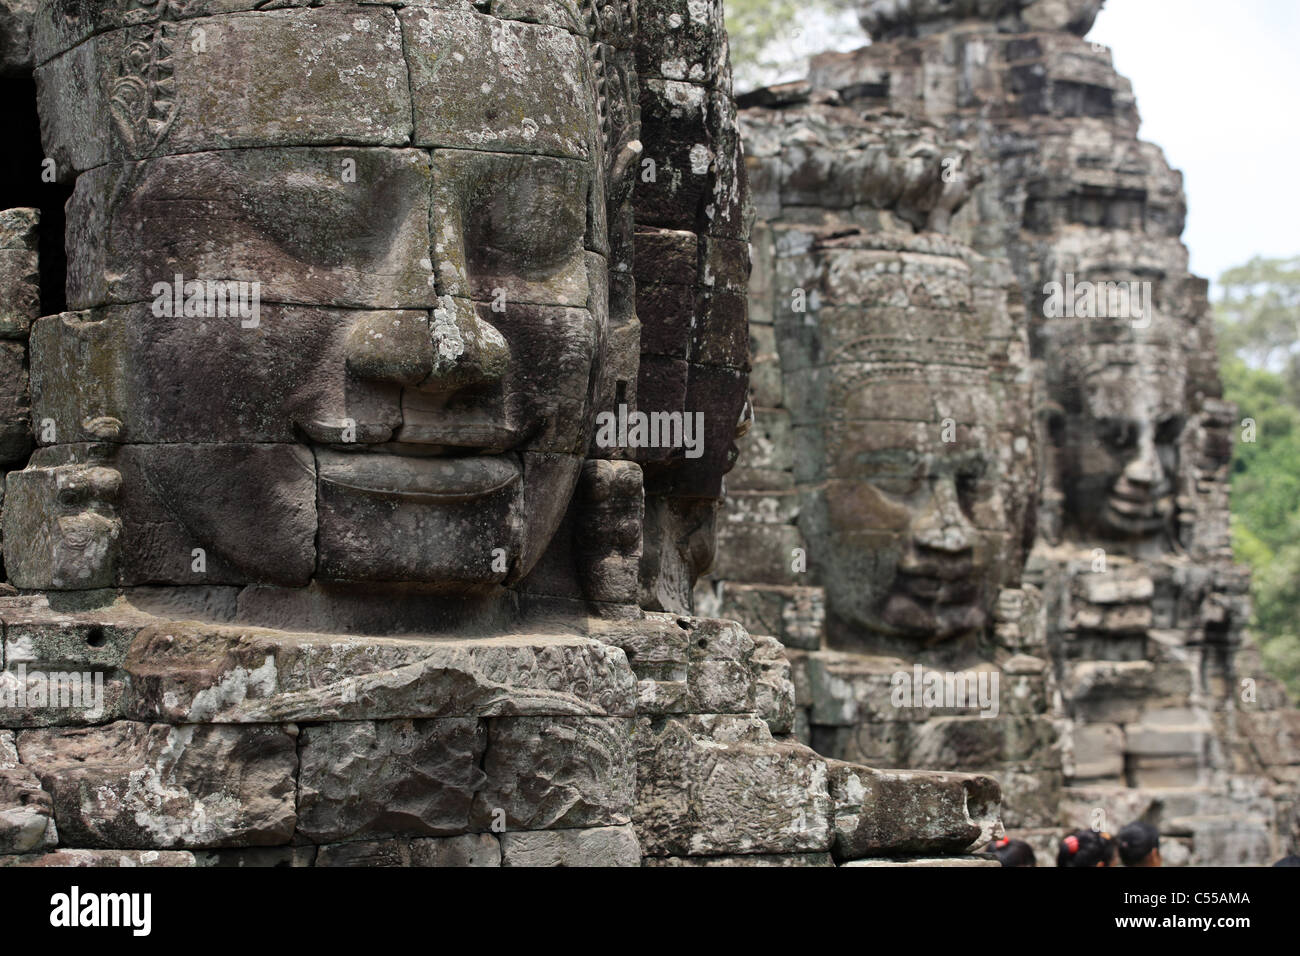 Carved heads at Bayon temple, Angkor Wat complex, Siem Reap, Cambodia Stock Photo